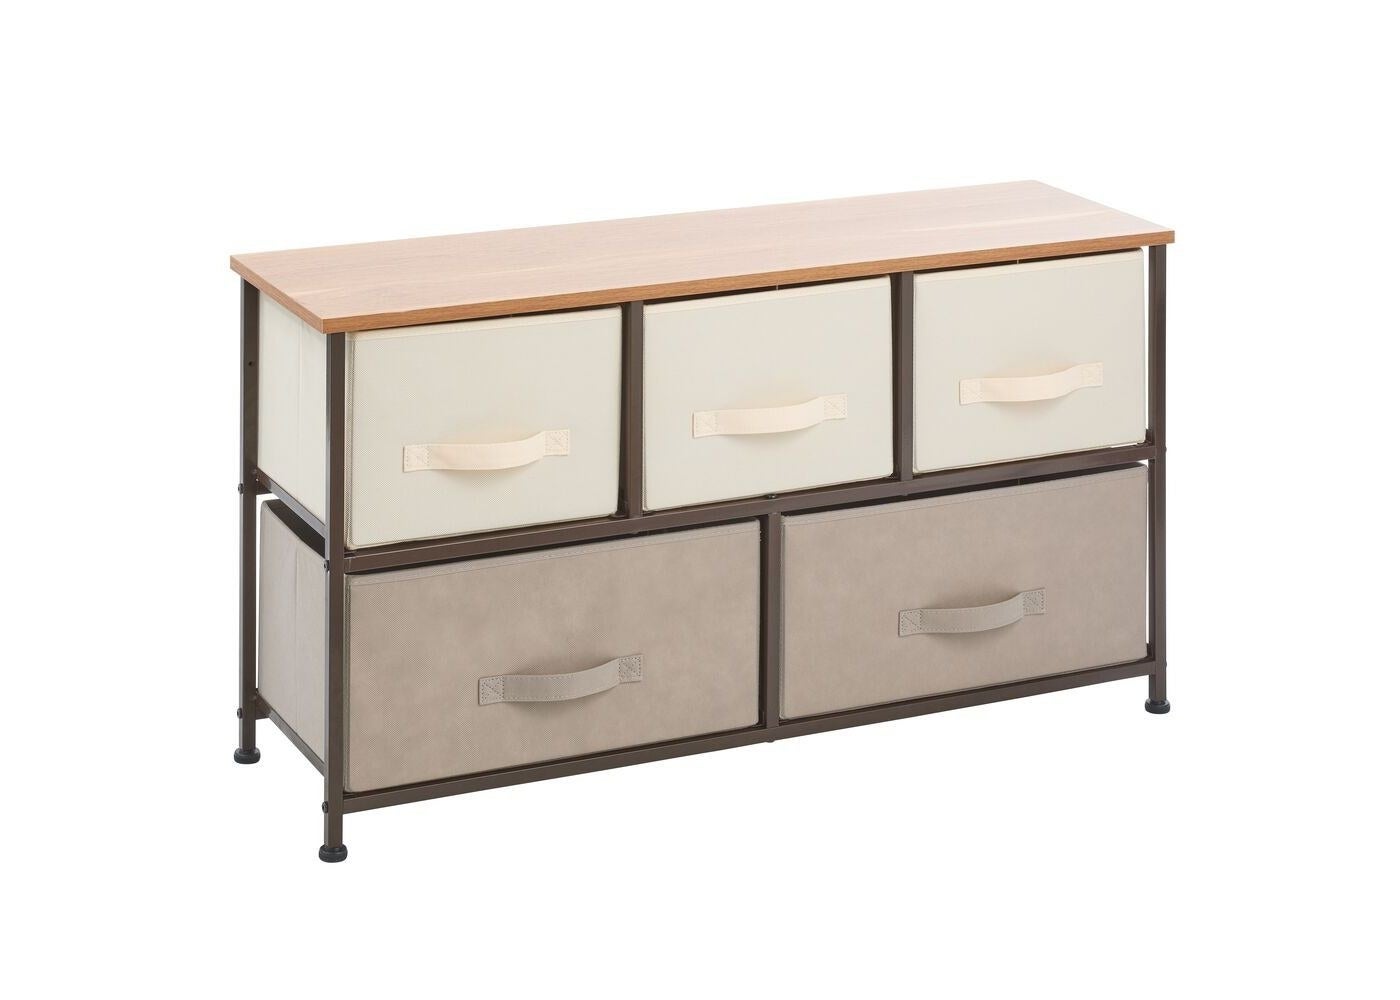 the wooden topped dresser with cream and gray bins